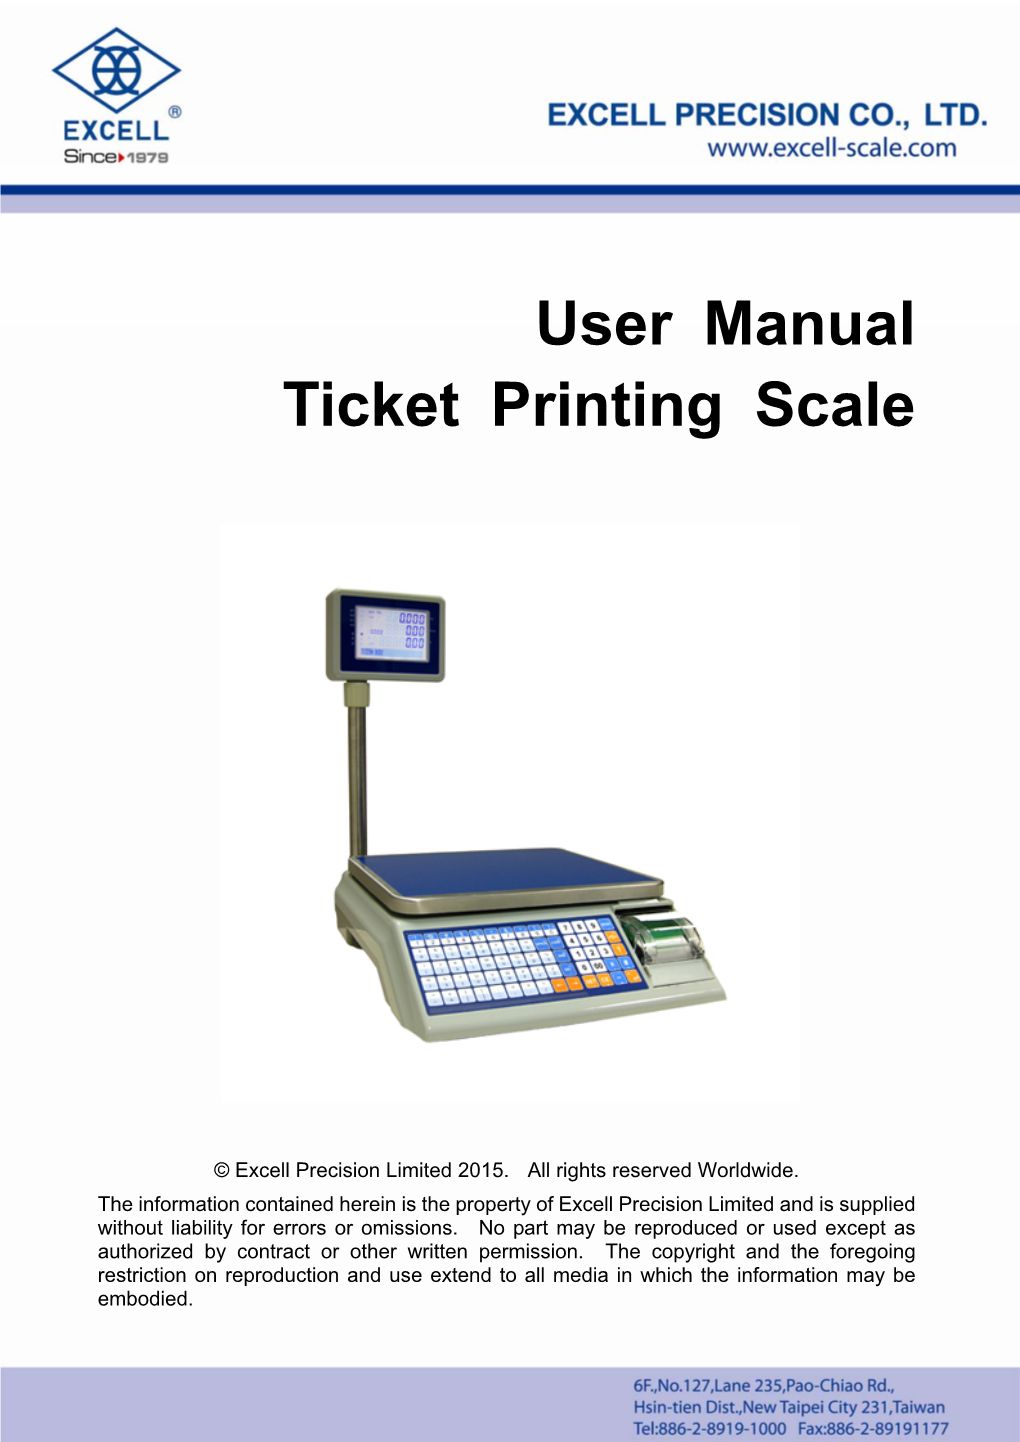 User Manual Ticket Printing Scale